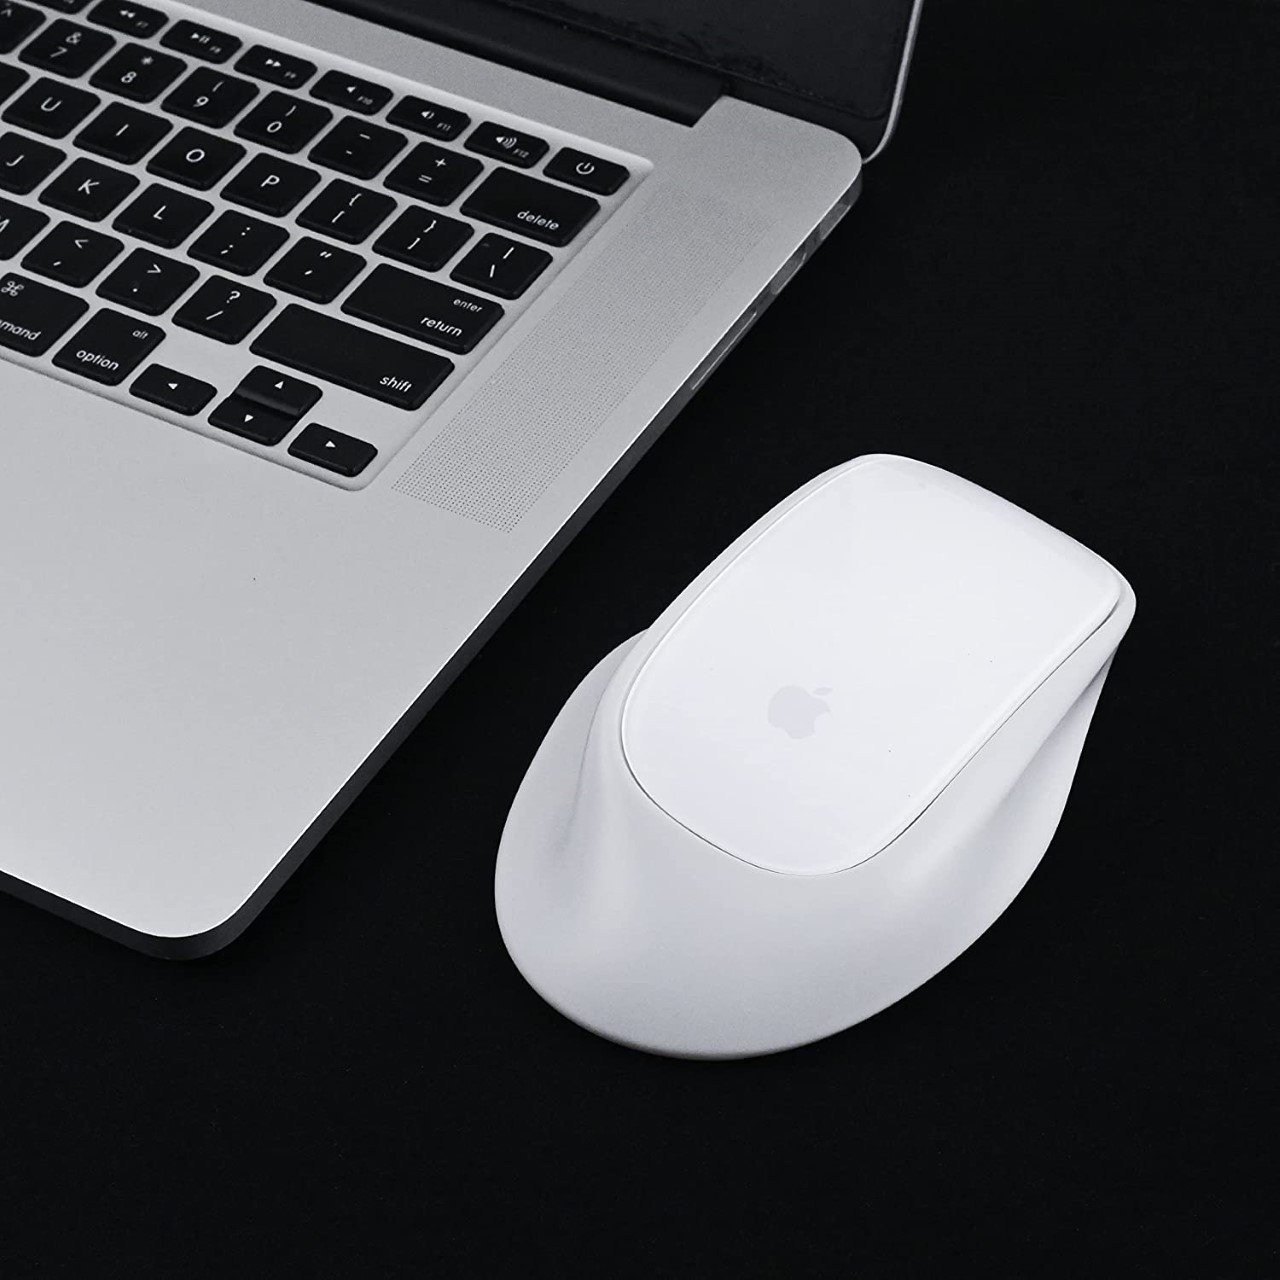 Apple's Magic Mouse gets its biggest 'design upgrade' with this